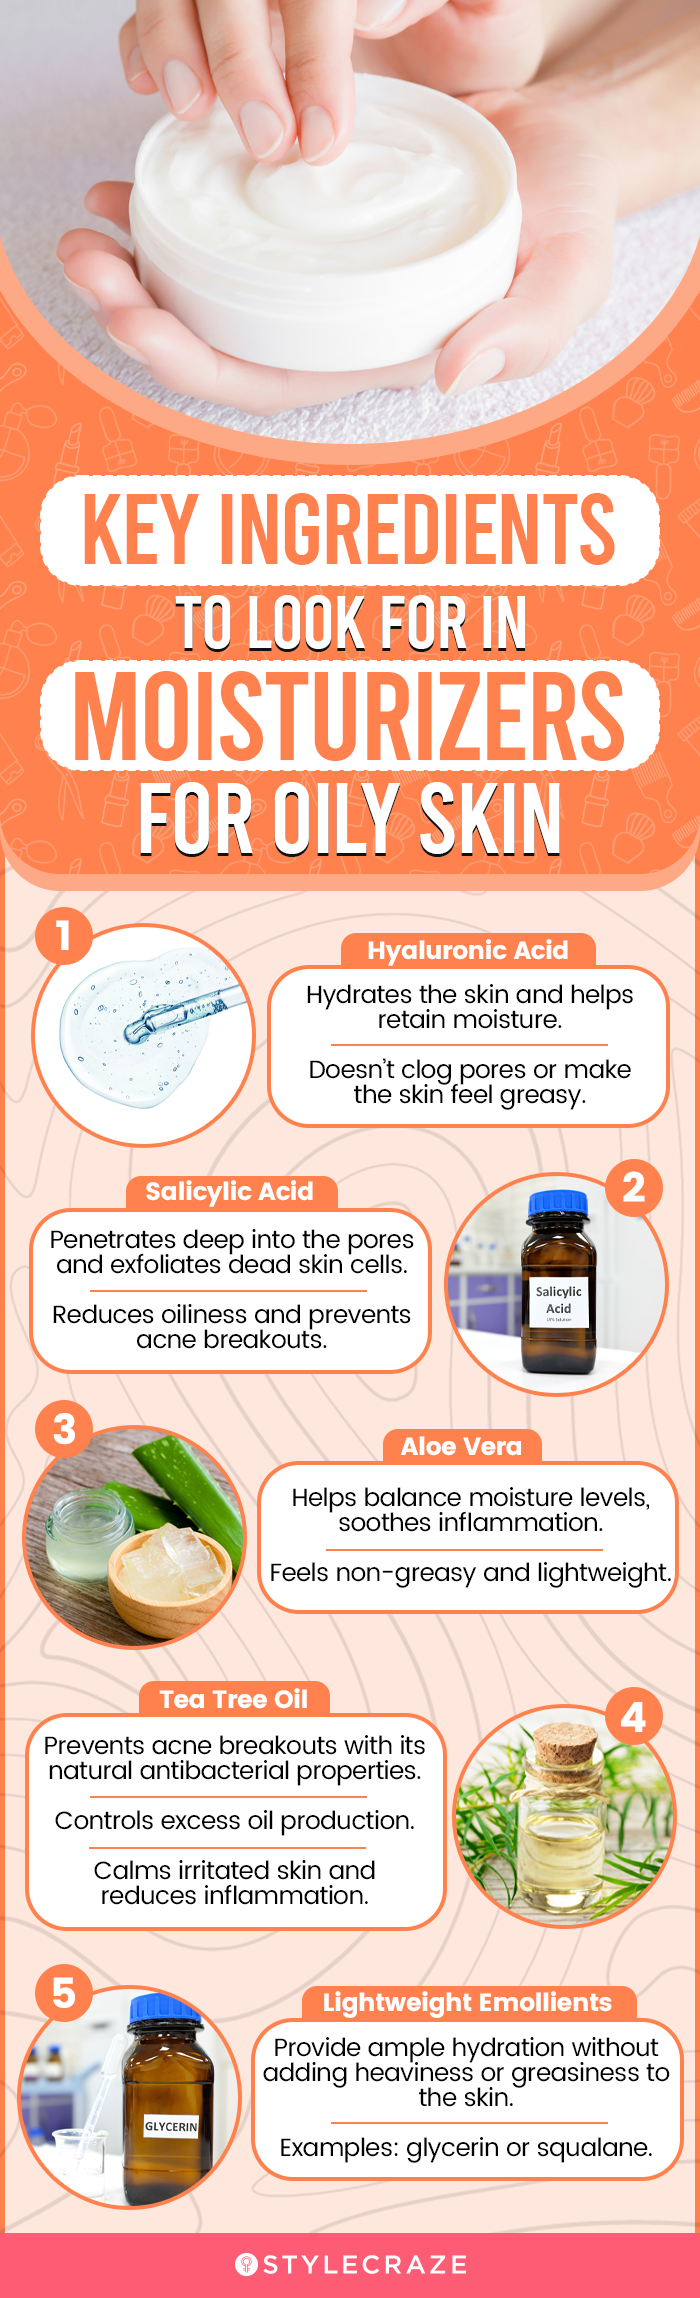 Key Ingredients To Look For In Moisturizers For Oily Skin (infographic)